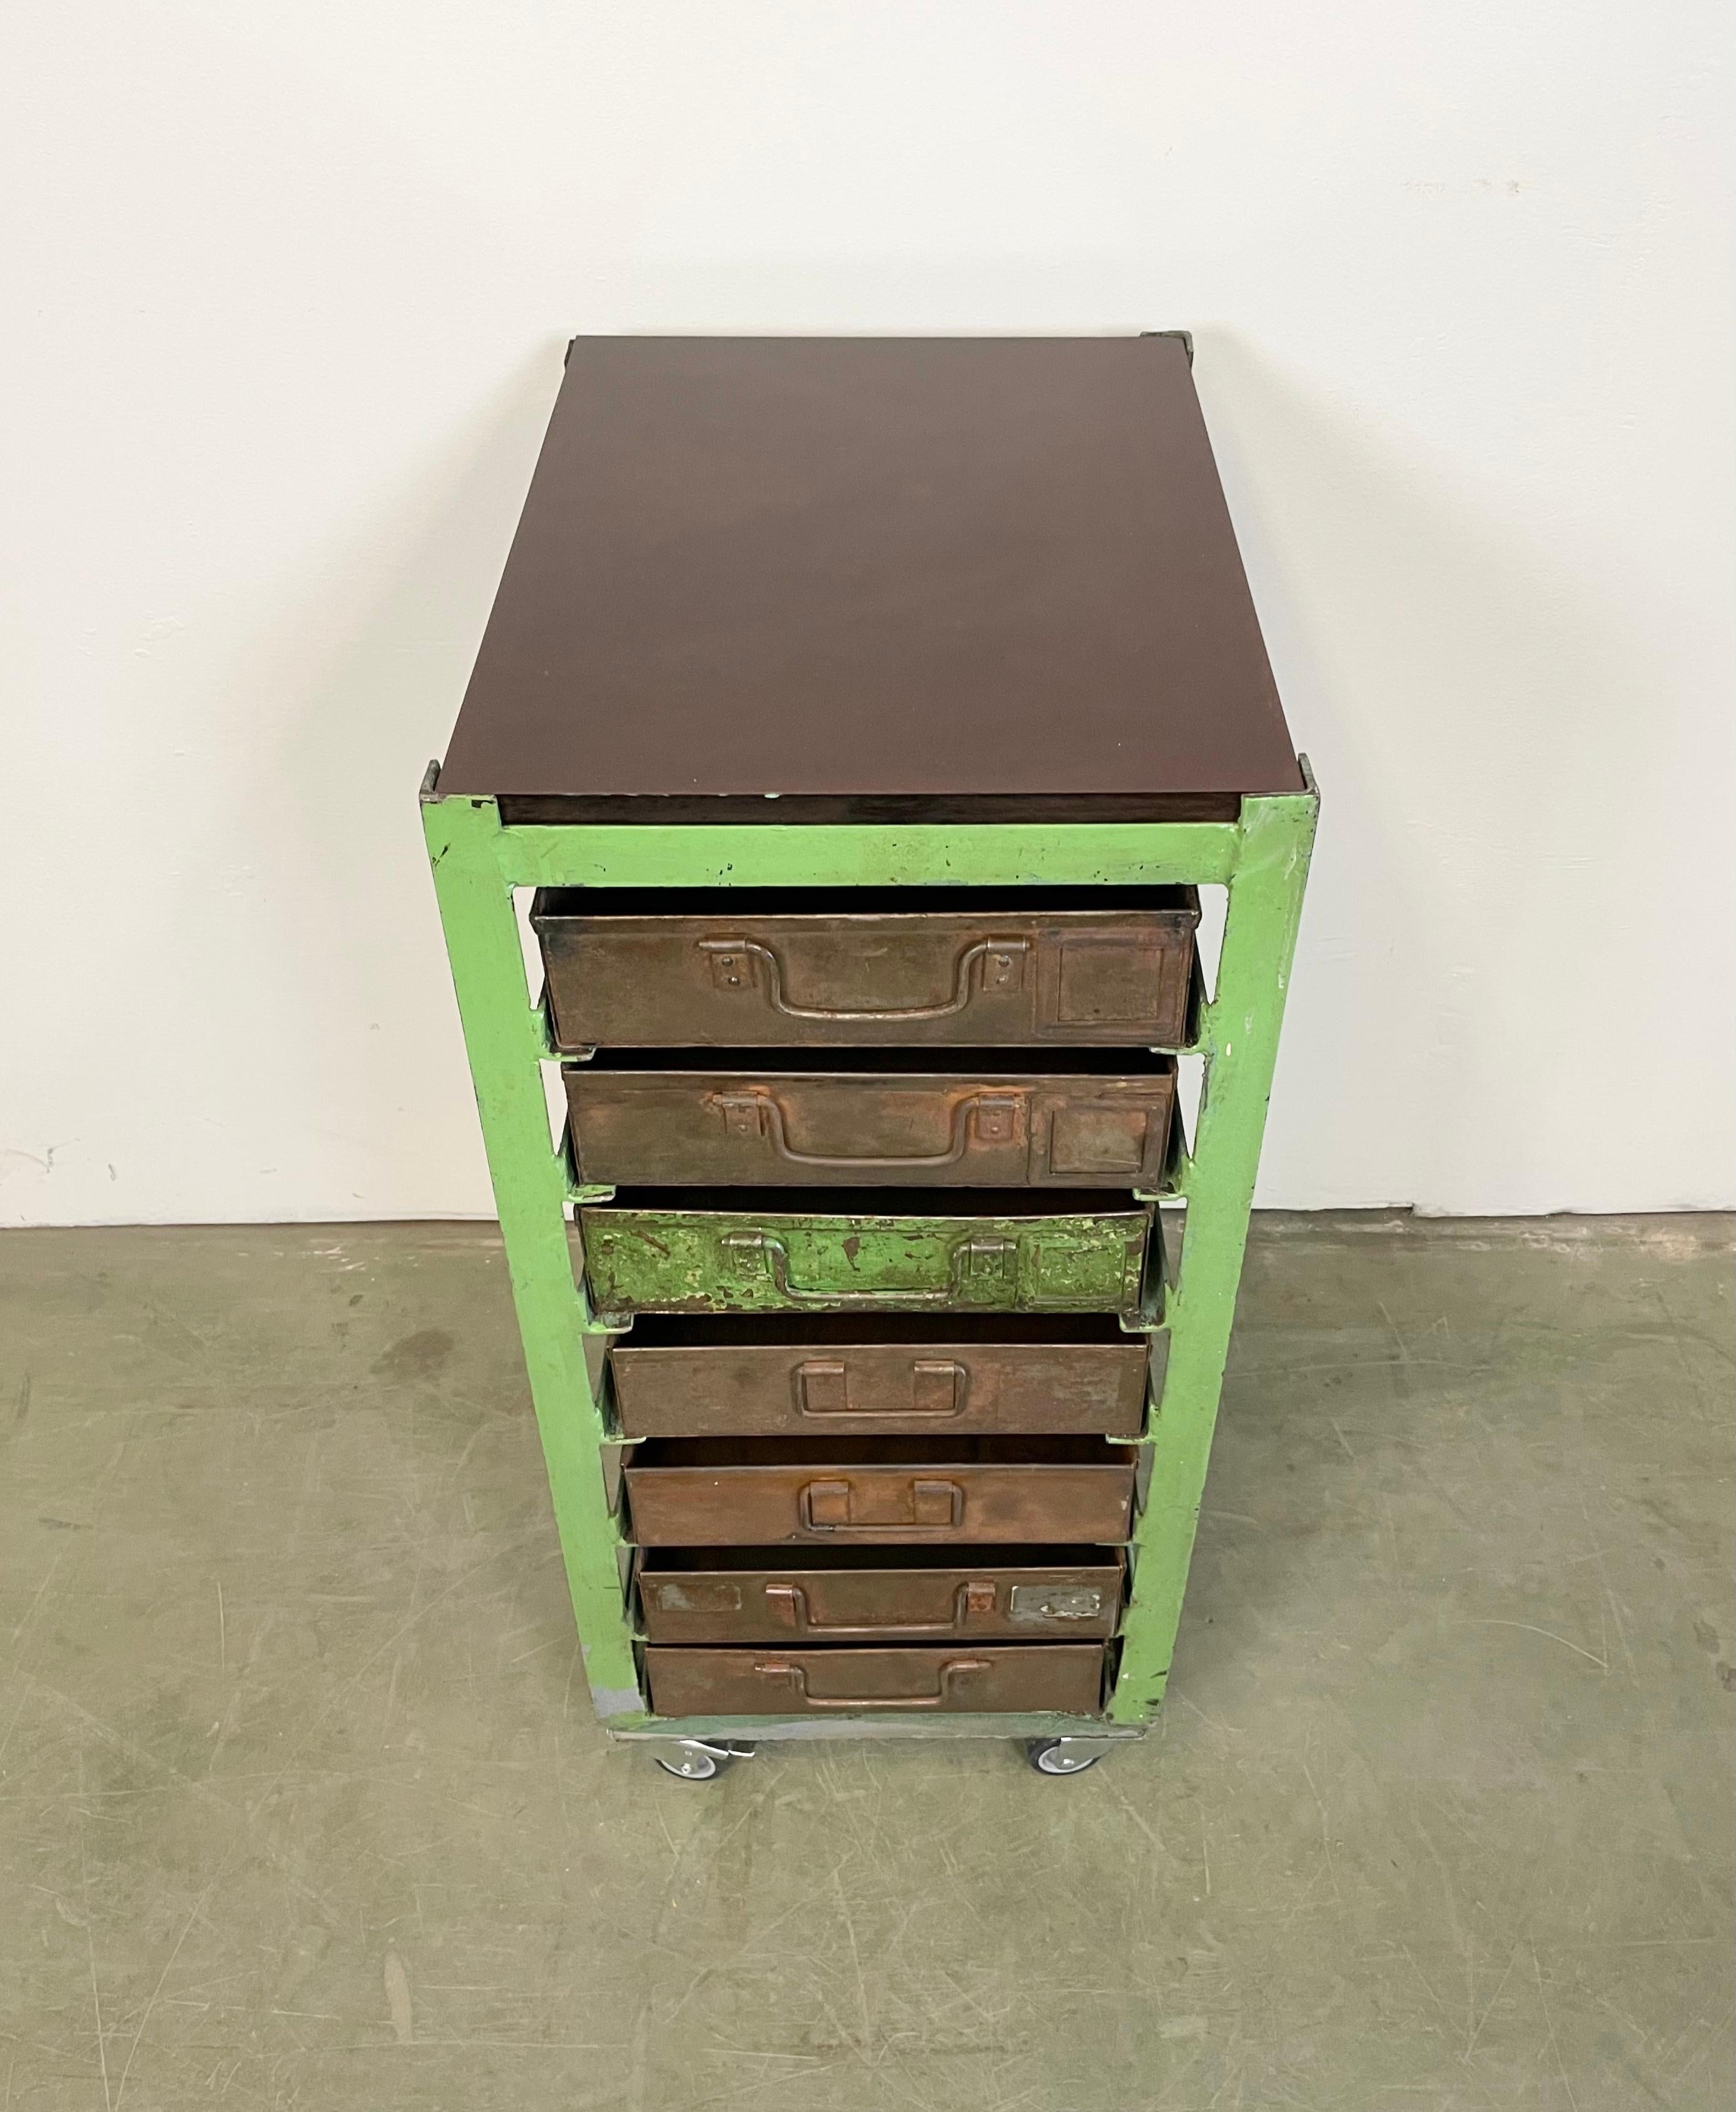 This vintage Industrial iron chest of drawers was made during the 1950s. It features an iron construction and 7 metal drawers. Additional dimensions: 
Drawer dimensions :- Width 28 cm, depth 44 cm, height 8 cm 
- Weight: 37 kg.